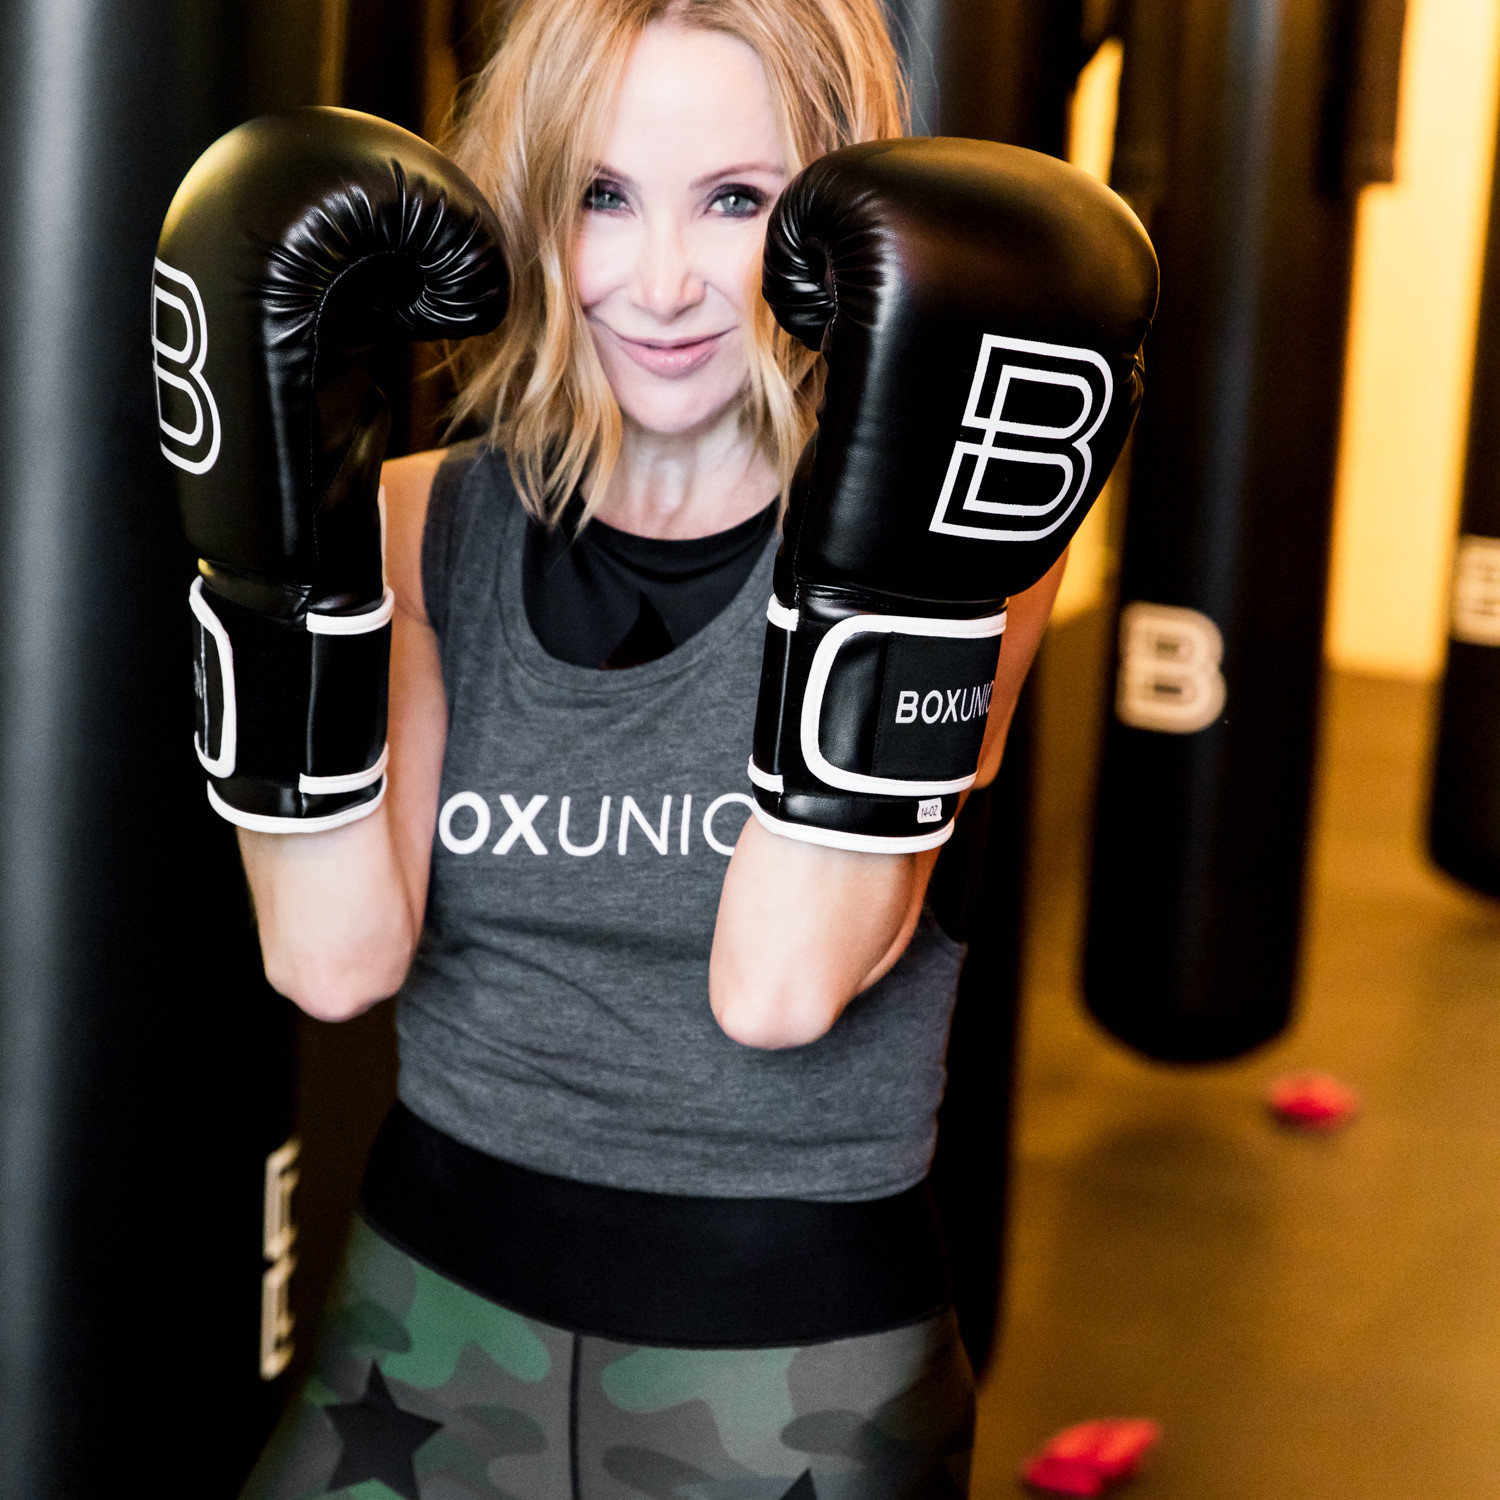 Lisa Breckenridge with boxunion boxing gloves